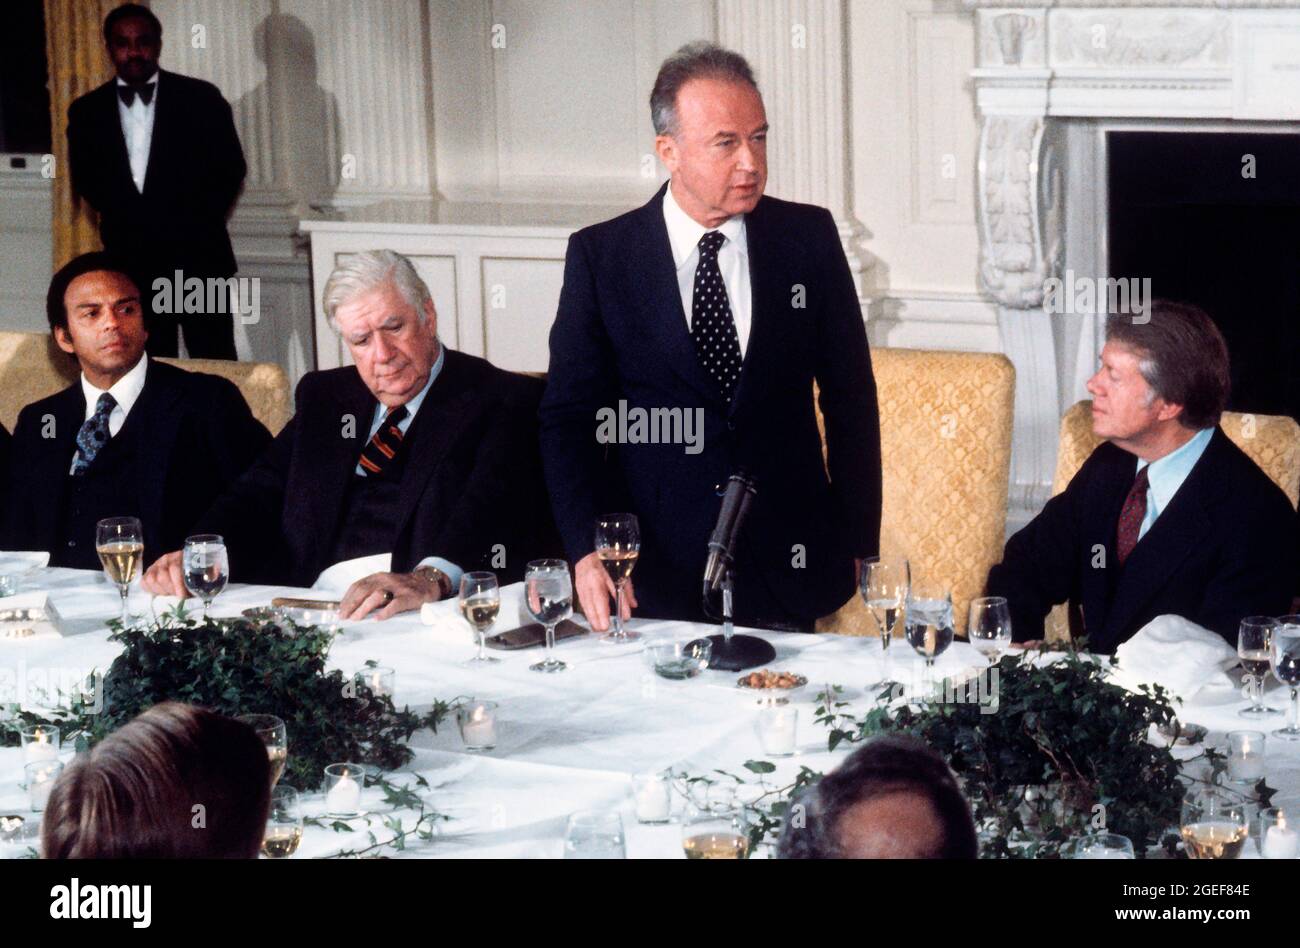 Prime Minister Yitzhak Rabin of Israel, right center, offers remarks at a working dinner in his honor hosted by United States President Jimmy Carter, right, in the State Dining Room of the White House in Washington, DC on Monday, March 7, 1977. Looking on is Speaker of the US House of Representatives Tip OâNeill (Democrat of Massachusetts), left center, and US Ambassador to the United Nations Andrew Young. Credit: Benjamin E. 'Gene' Forte/CNP Stock Photo